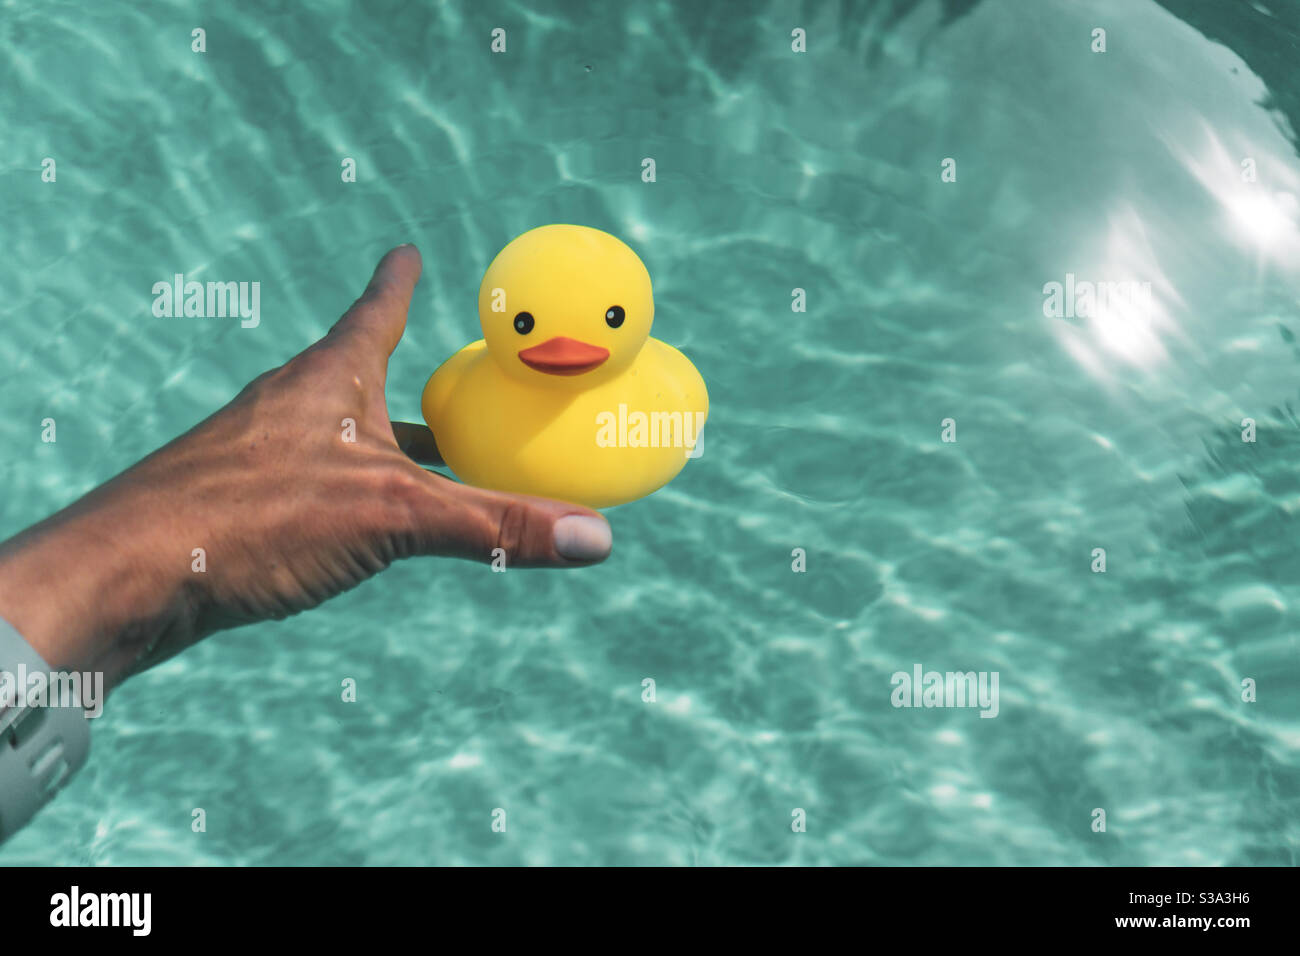 Woman’s hand reaching for yellow rubber duck underwater in an outdoor swimming pool with sunlight. Stock Photo